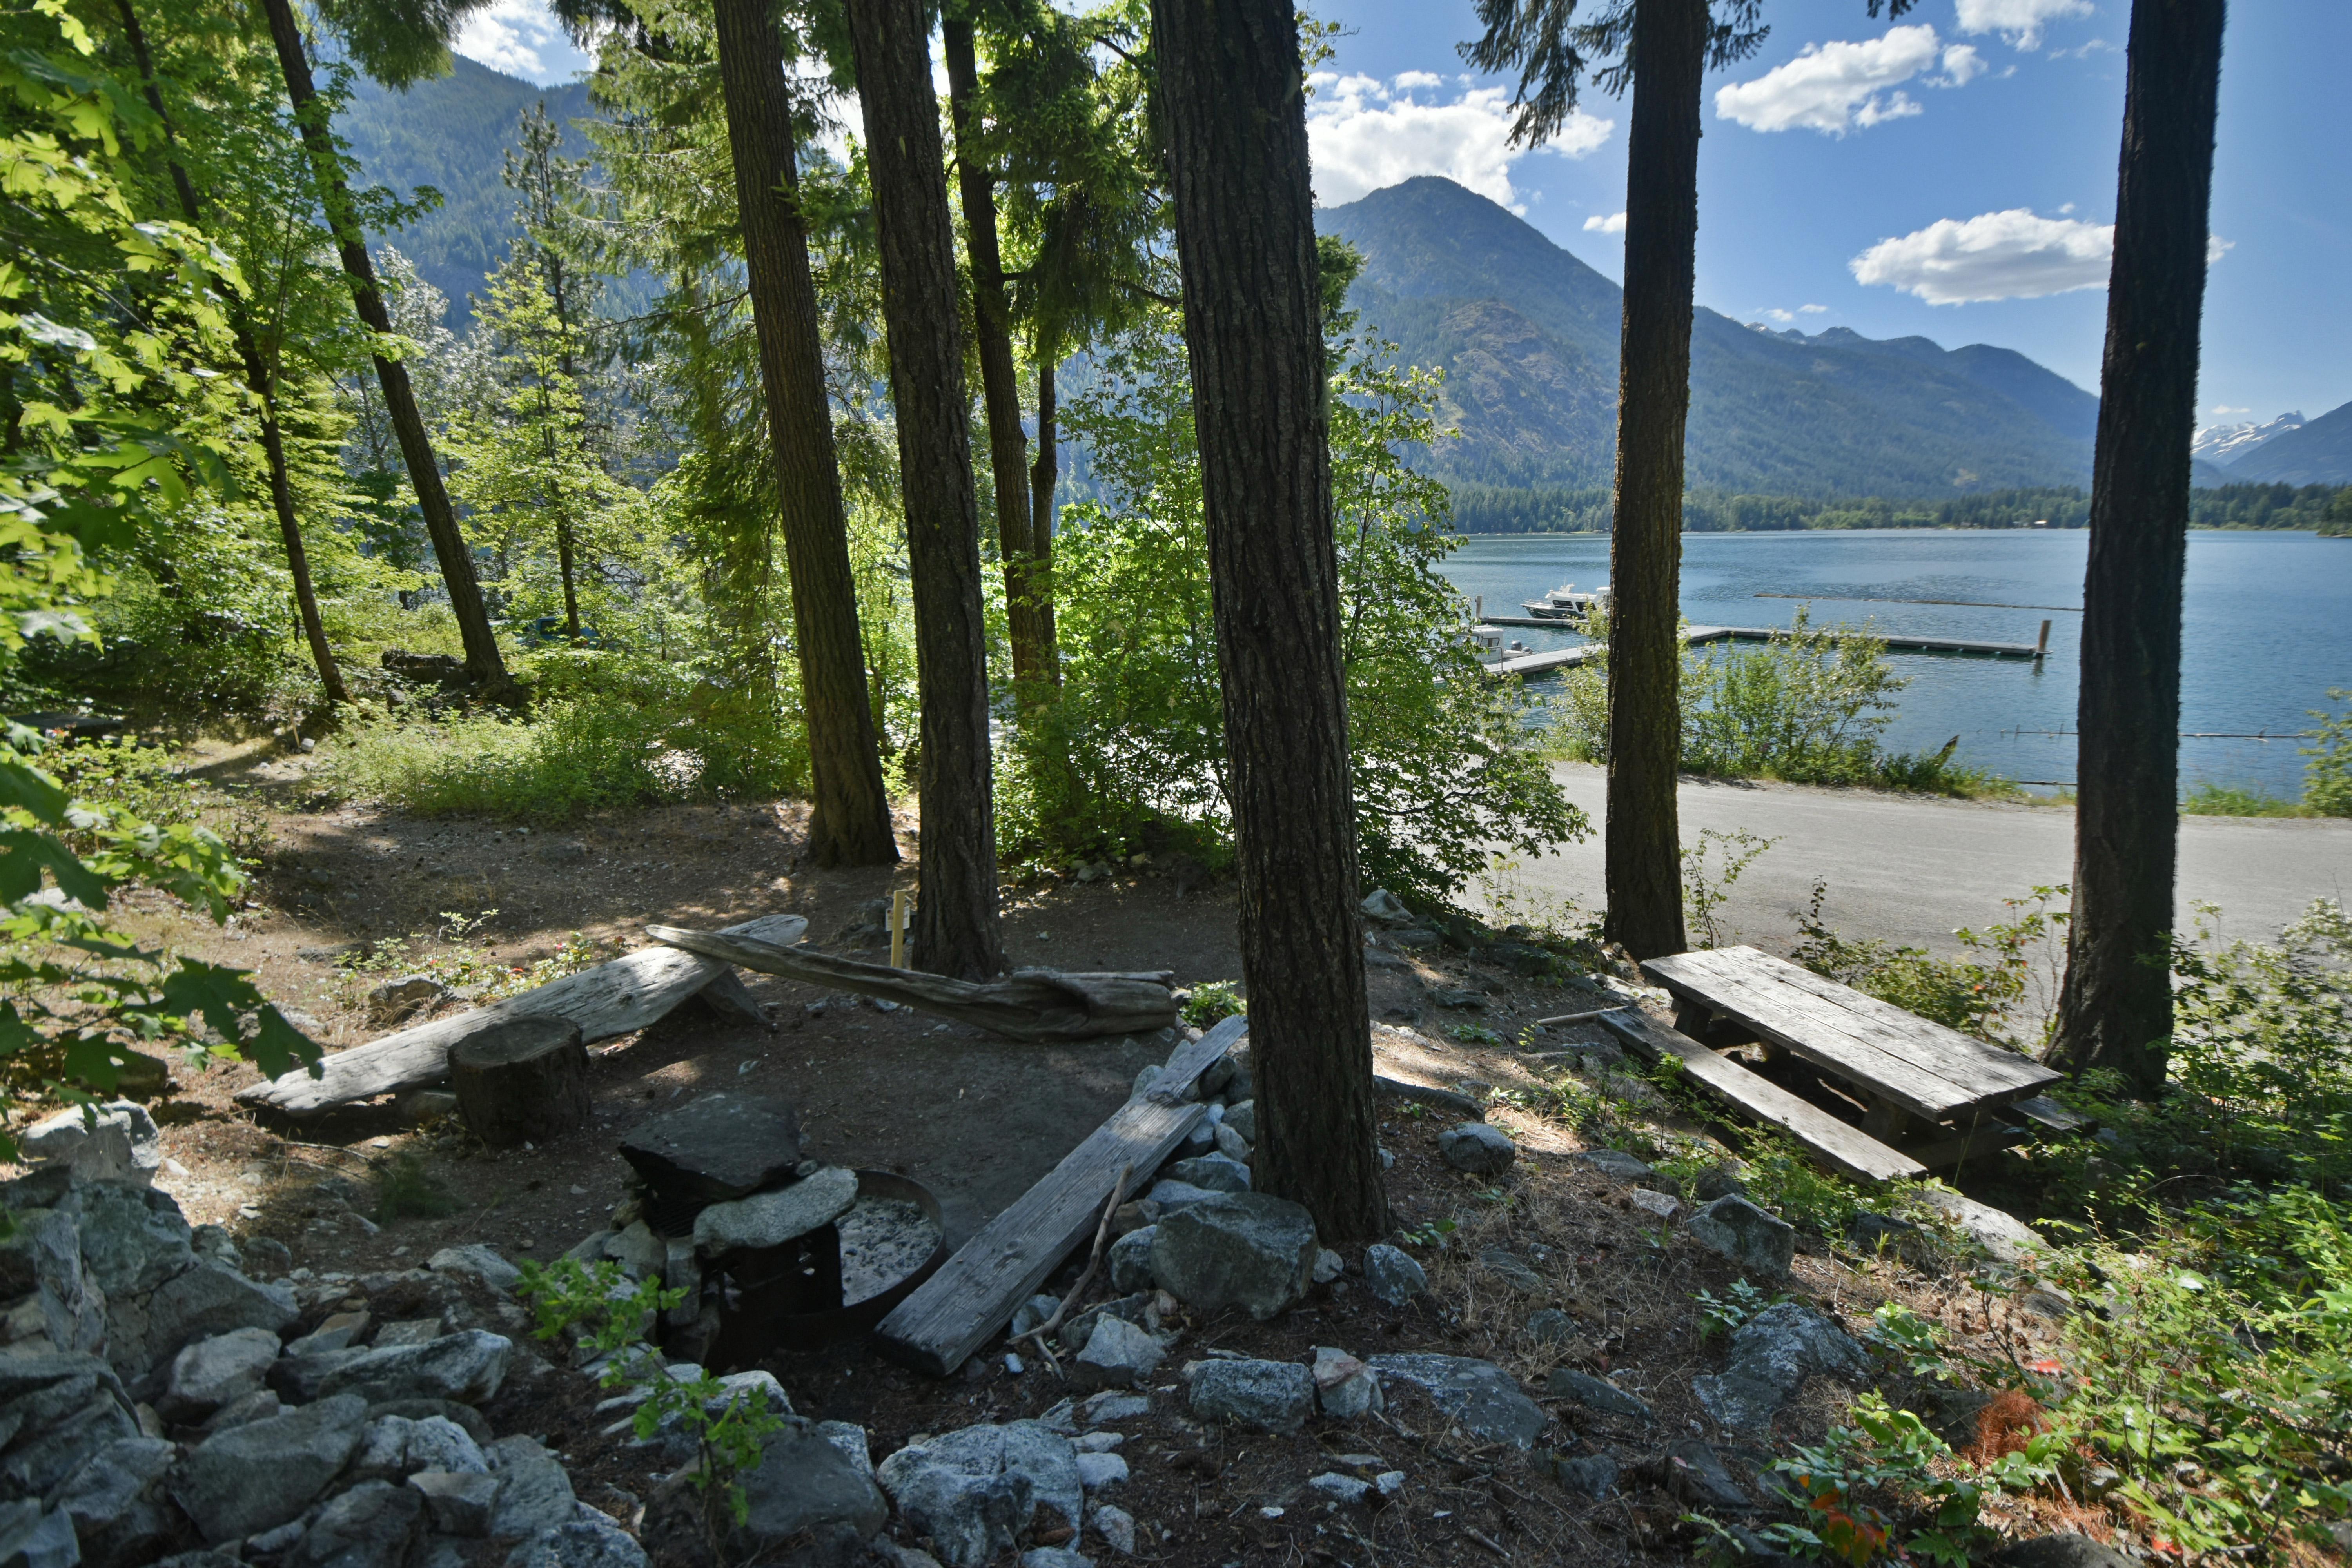 A wooden picnic table at a campsite overlooks a paved road, large lake, and distant mountains.